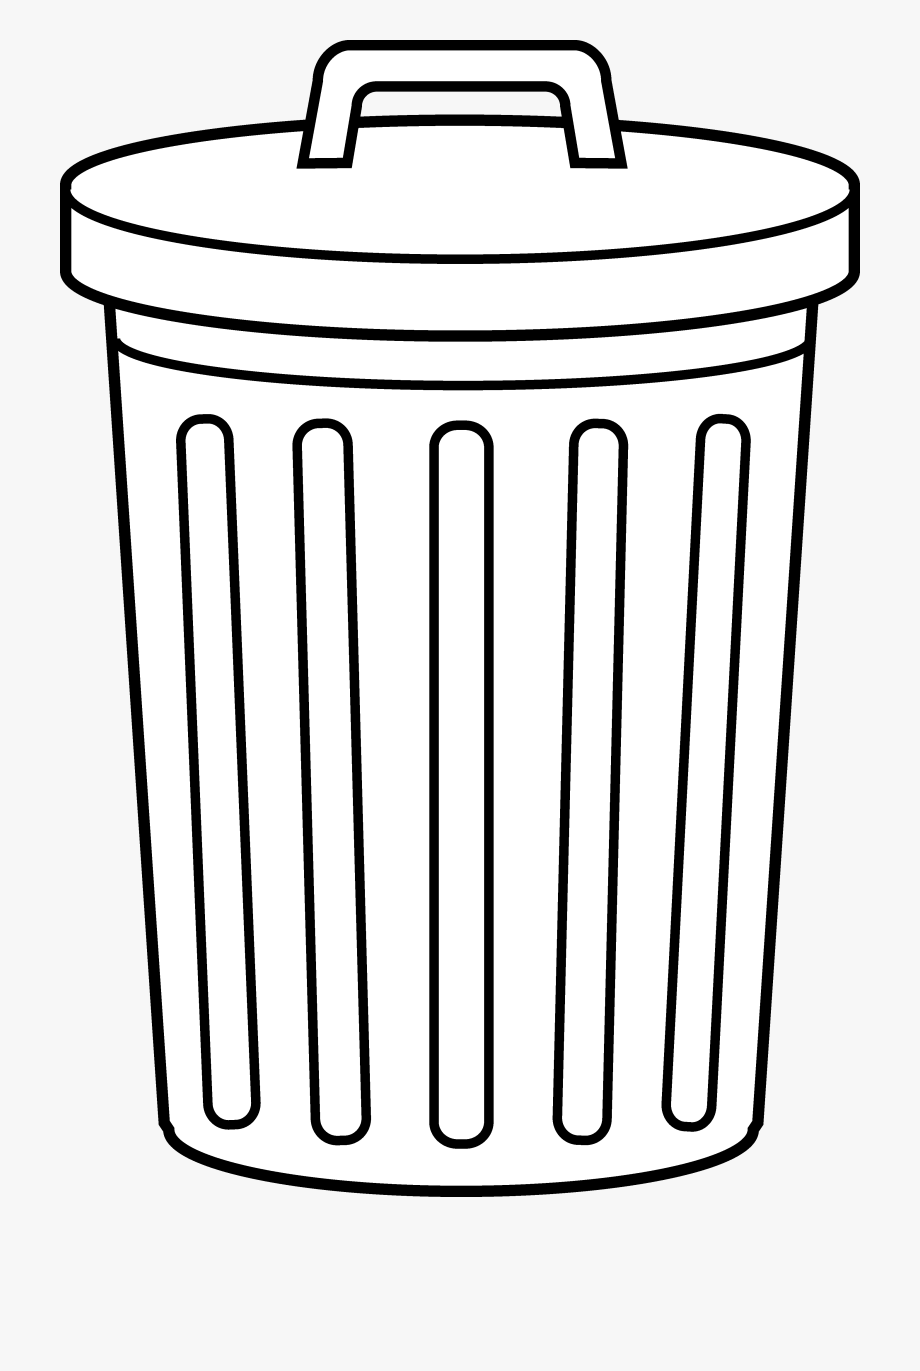 Awesome Free Pictures Of Trash Cans, Download Free